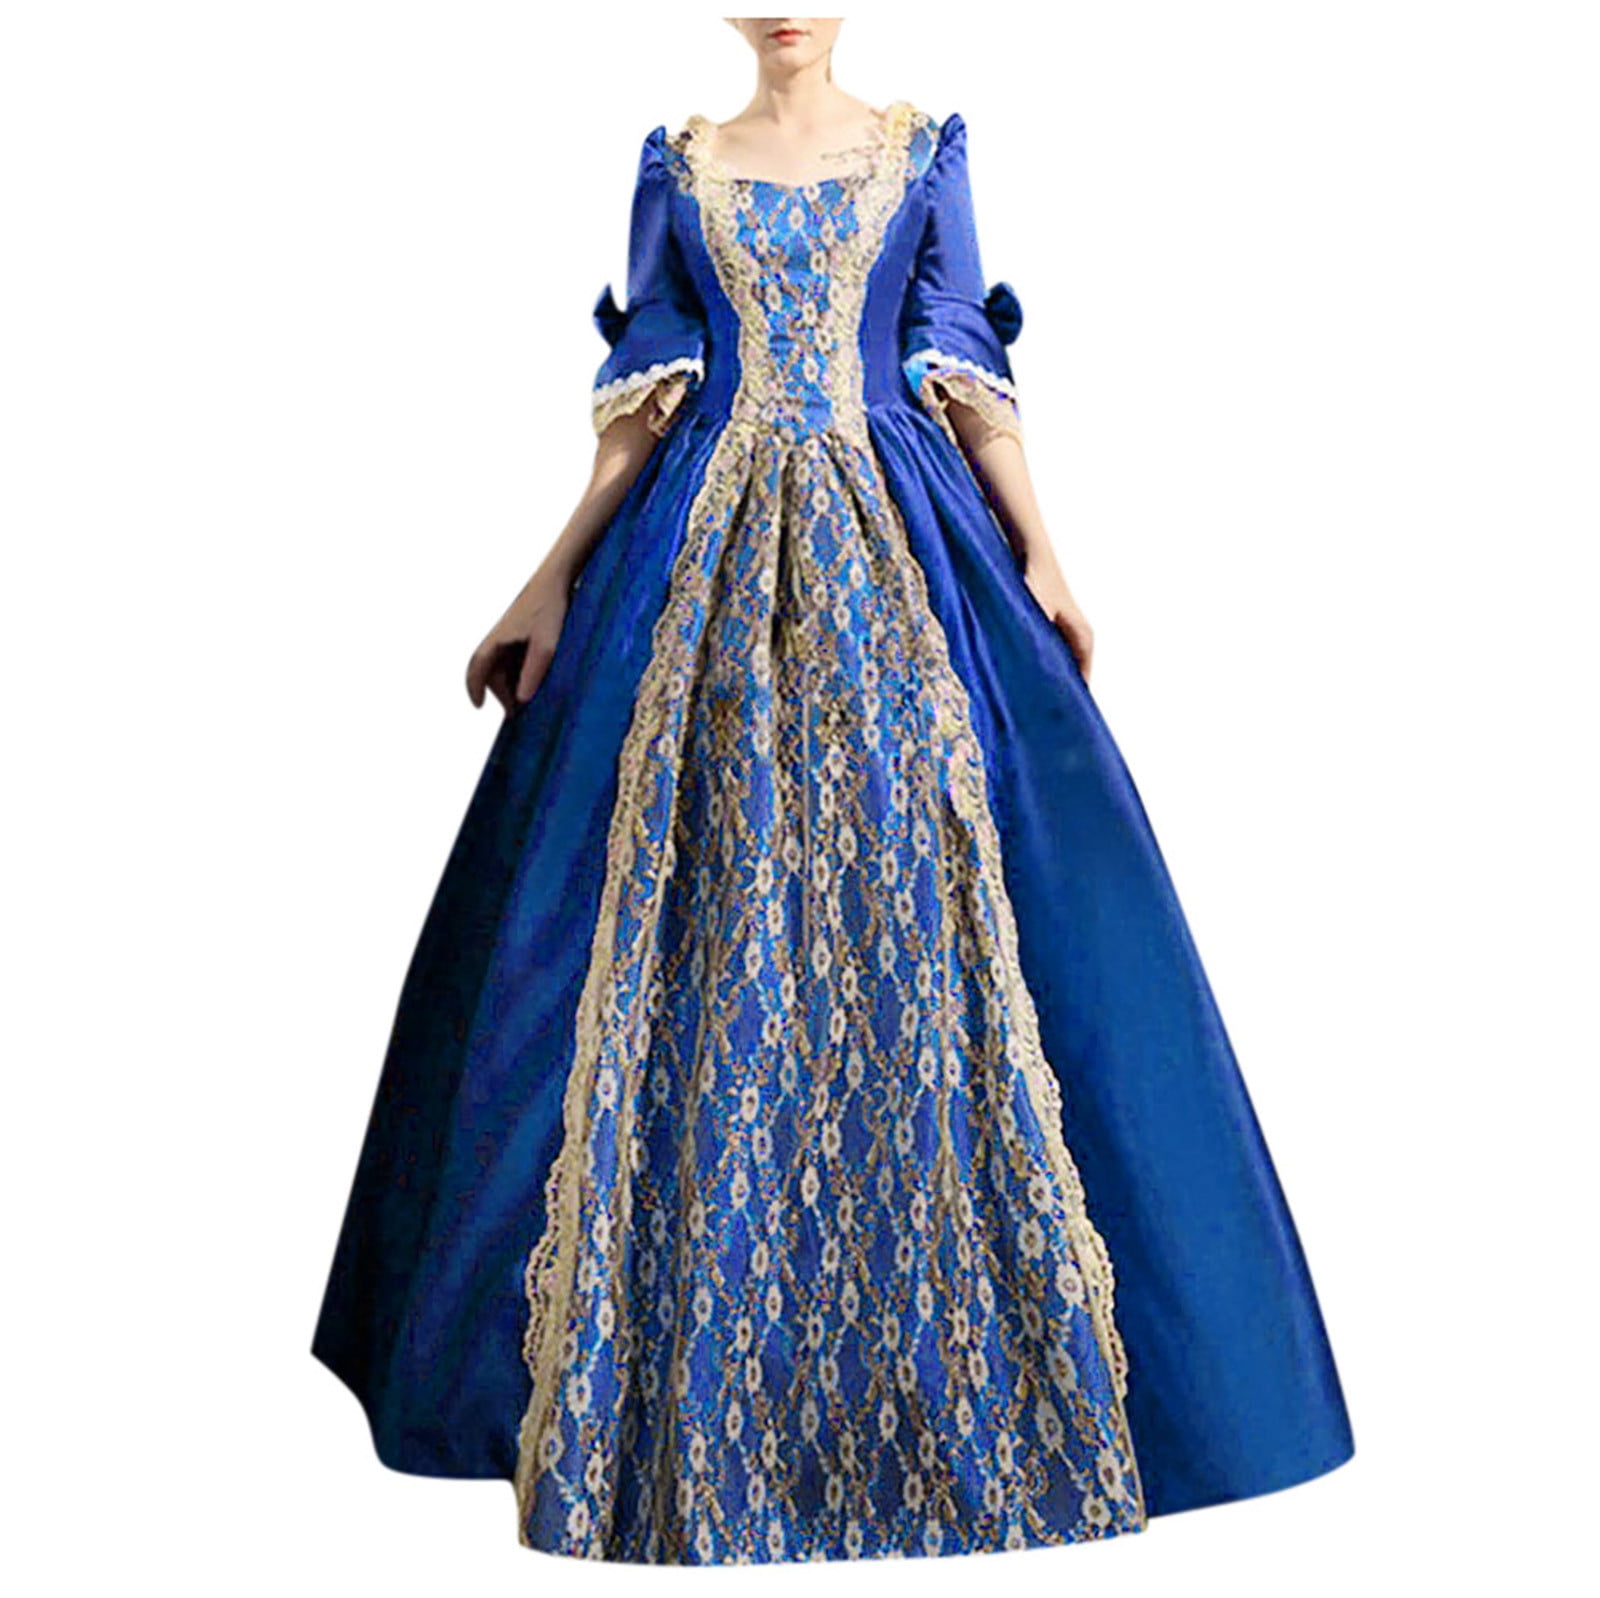 Medieval Renaissance Gown Dress For Women - Medieval Court Gown Dresses For  Women Renaissance Victorian Costumes Half Sleeve Lace Splice Dress  Halloween Cosplay, Fortune Teller Costume 